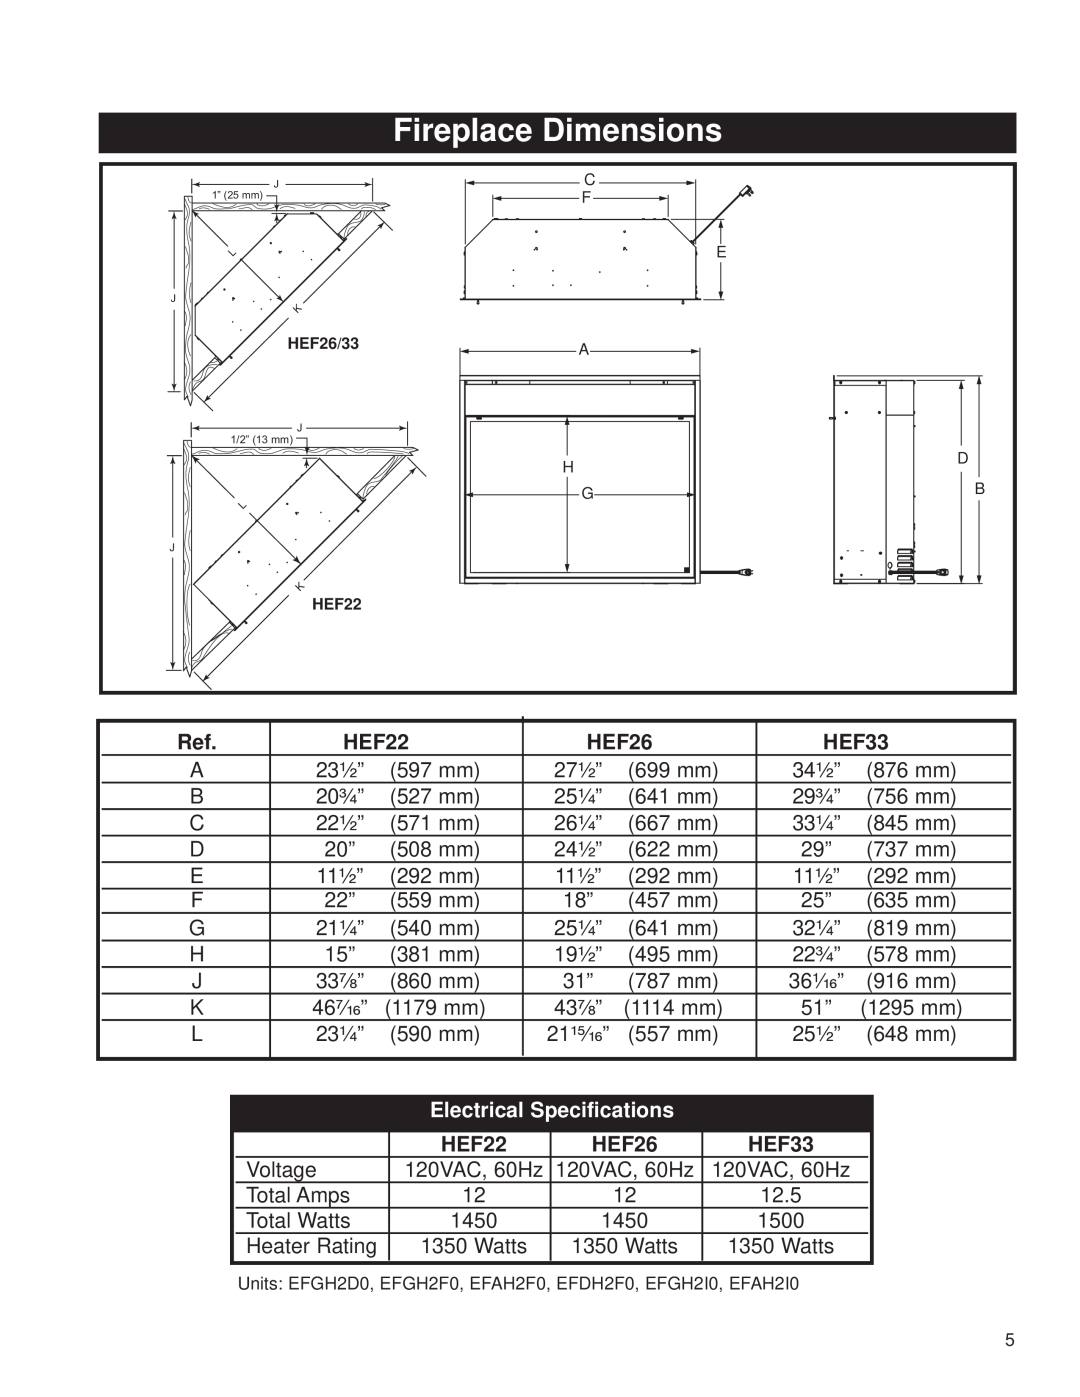 CFM Corporation HEF26 installation instructions Fireplace Dimensions, HEF22, HEF33, Electrical Specifications 